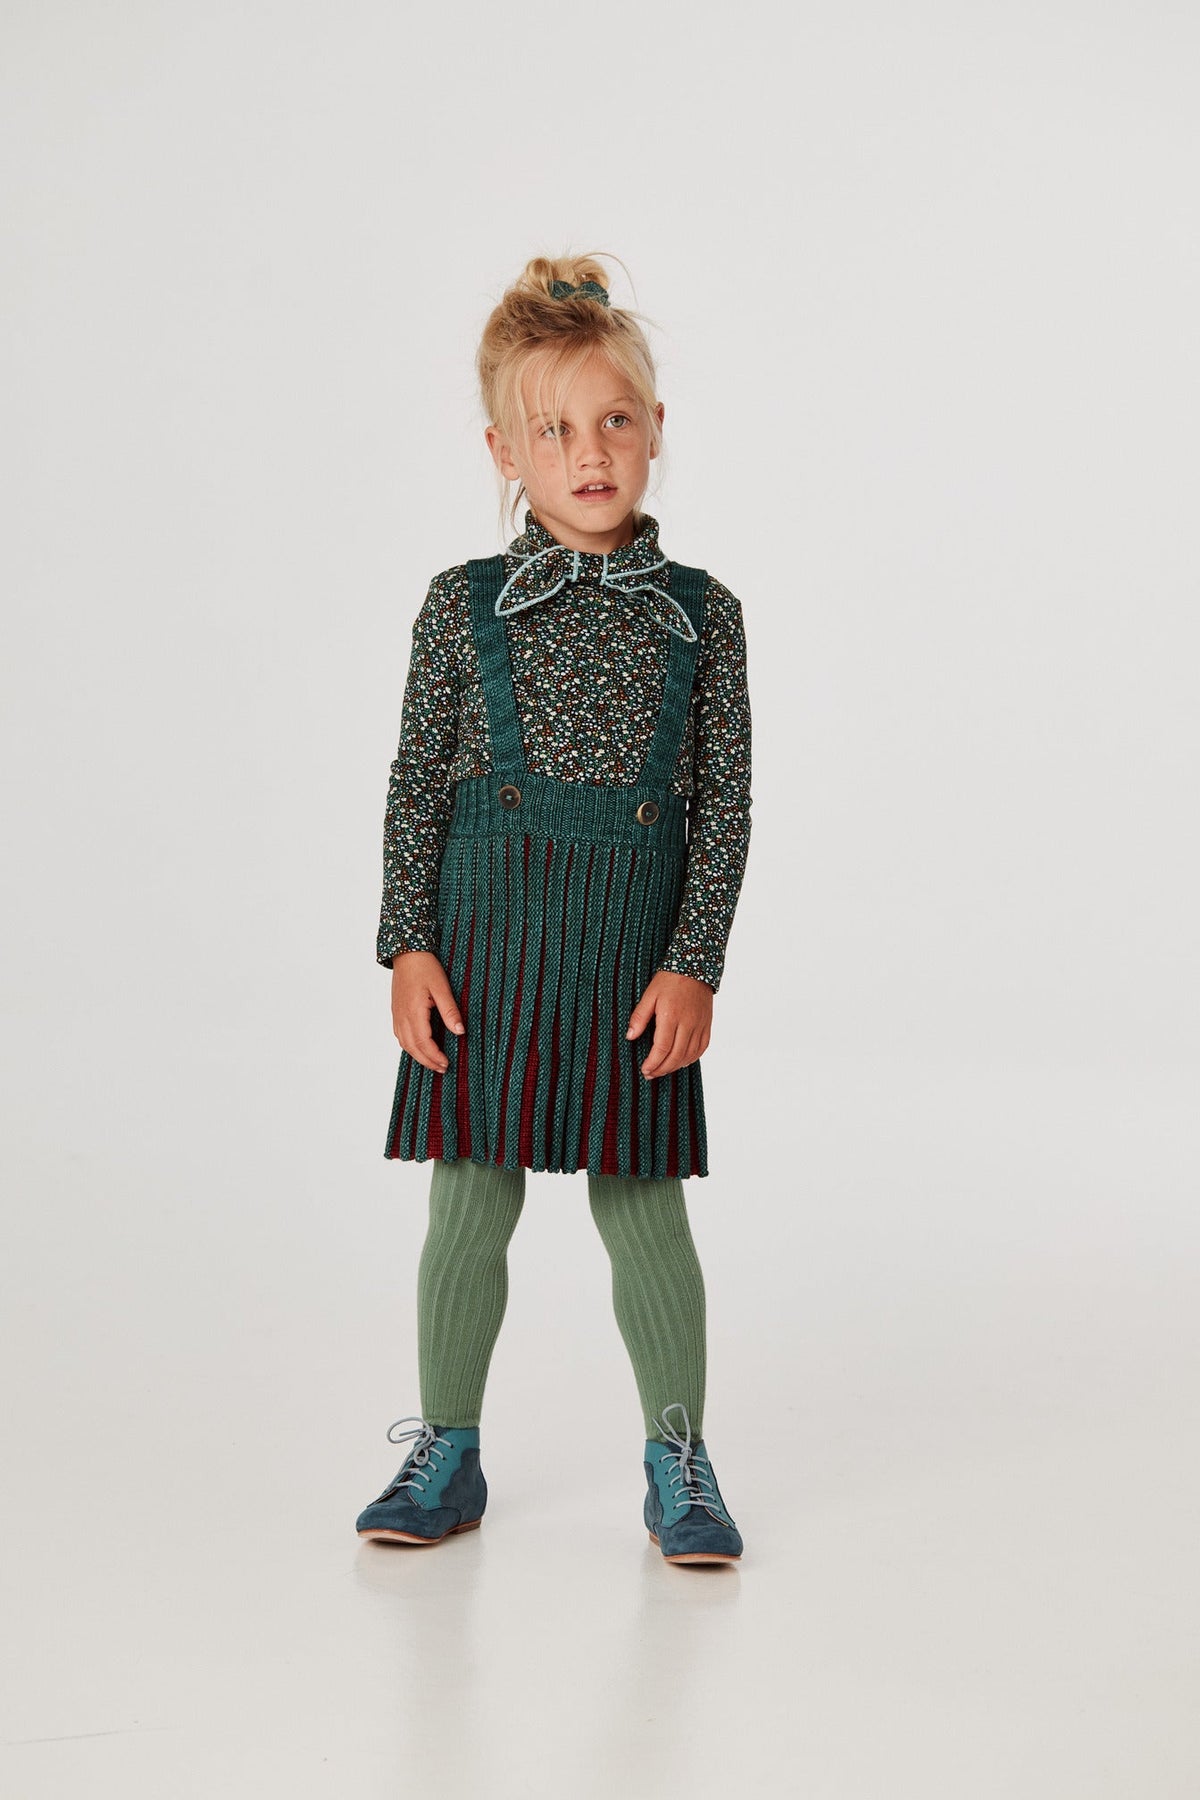 Accordion Pleat Pinafore - Peacock+Model is 41 inches tall, 38lbs, wearing a size 4-5y